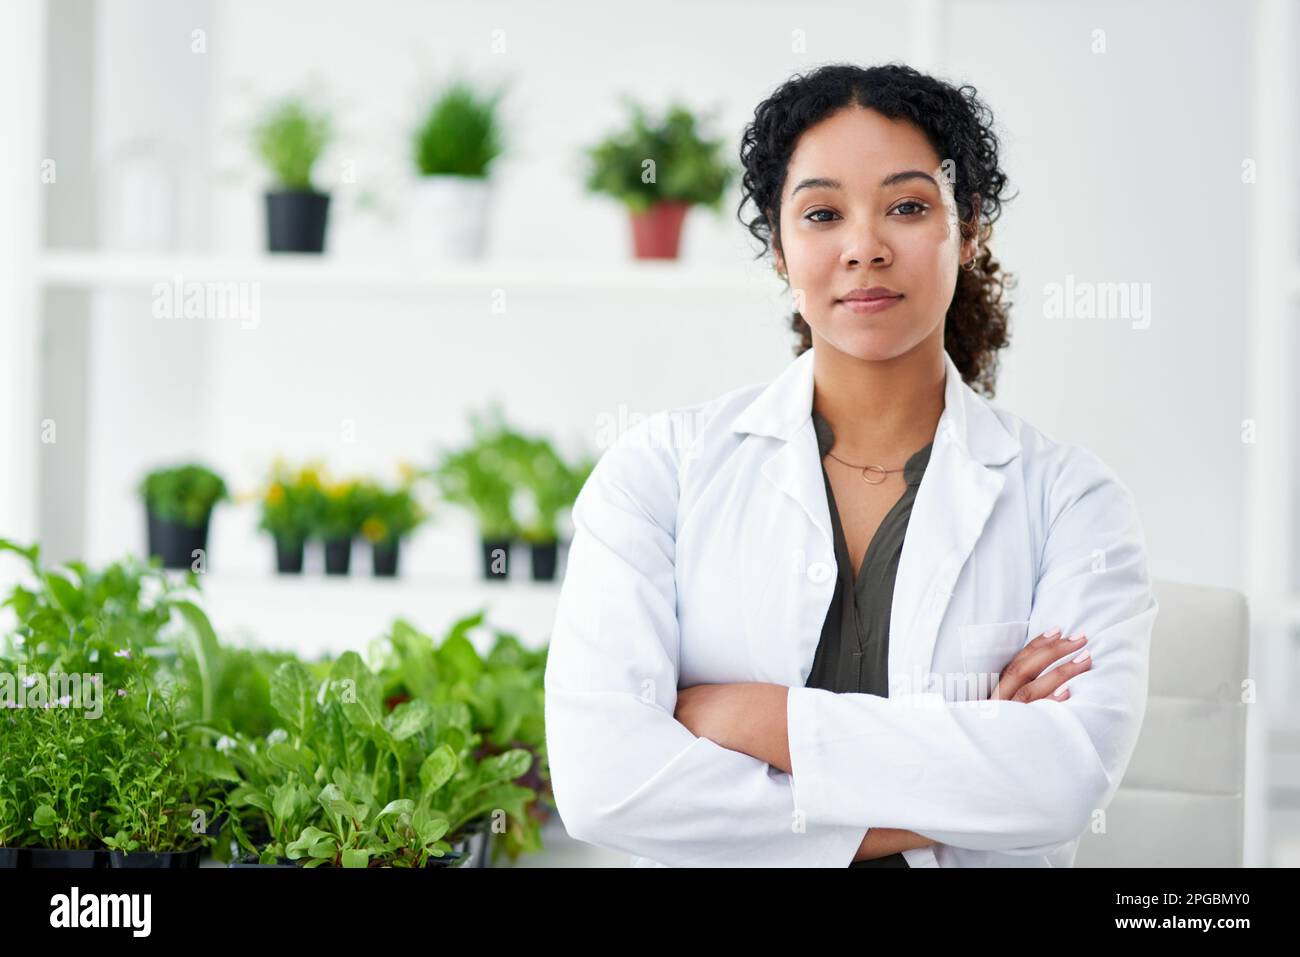 Im helping to grow a better future. Portrait of a female scientist standing in her lab. Stock Photo